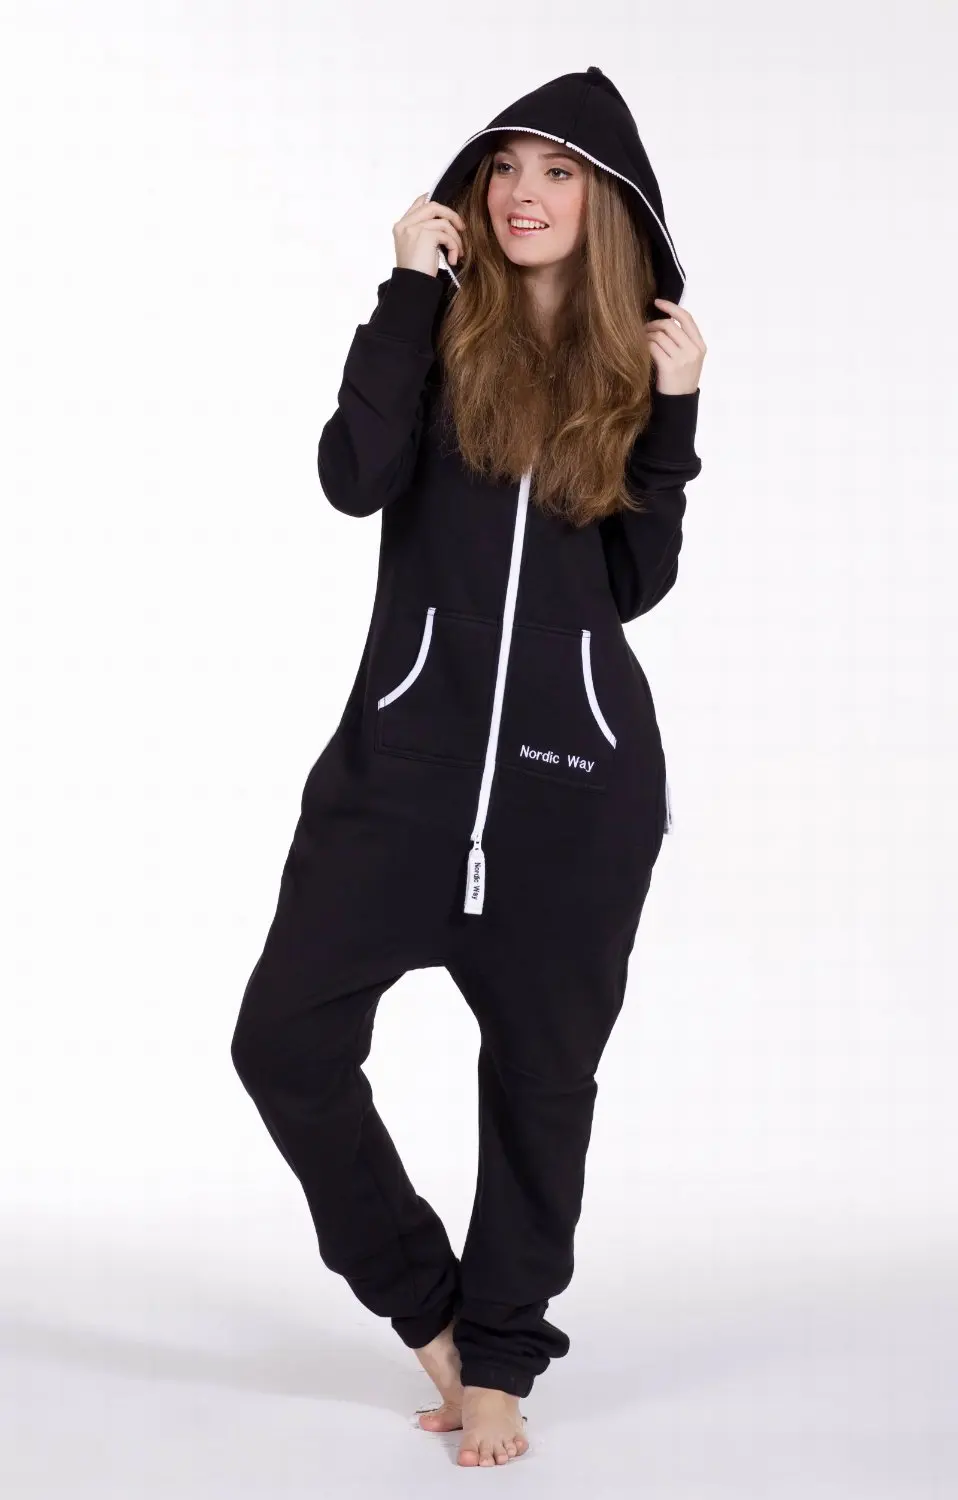 Aliexpress.com : Buy Free shipping one piece jumpsuit adult onesies zip